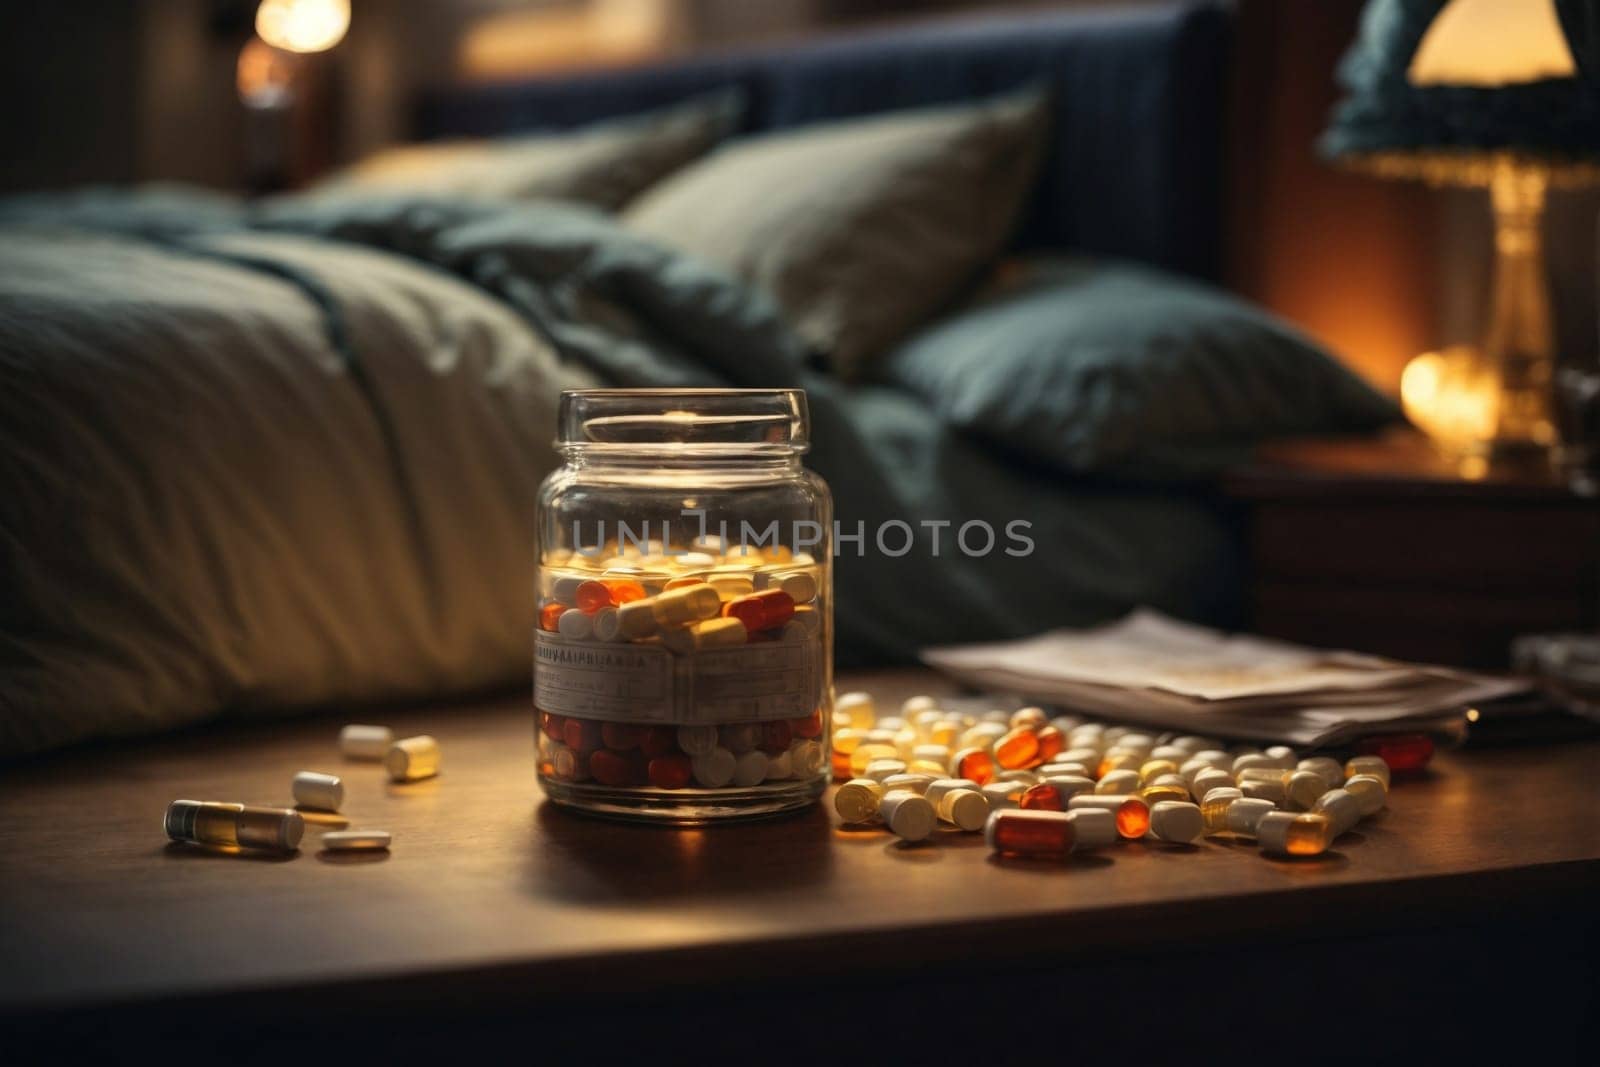 A jar filled with pills is placed on top of a table, showcasing the arrangement and contents of the container.